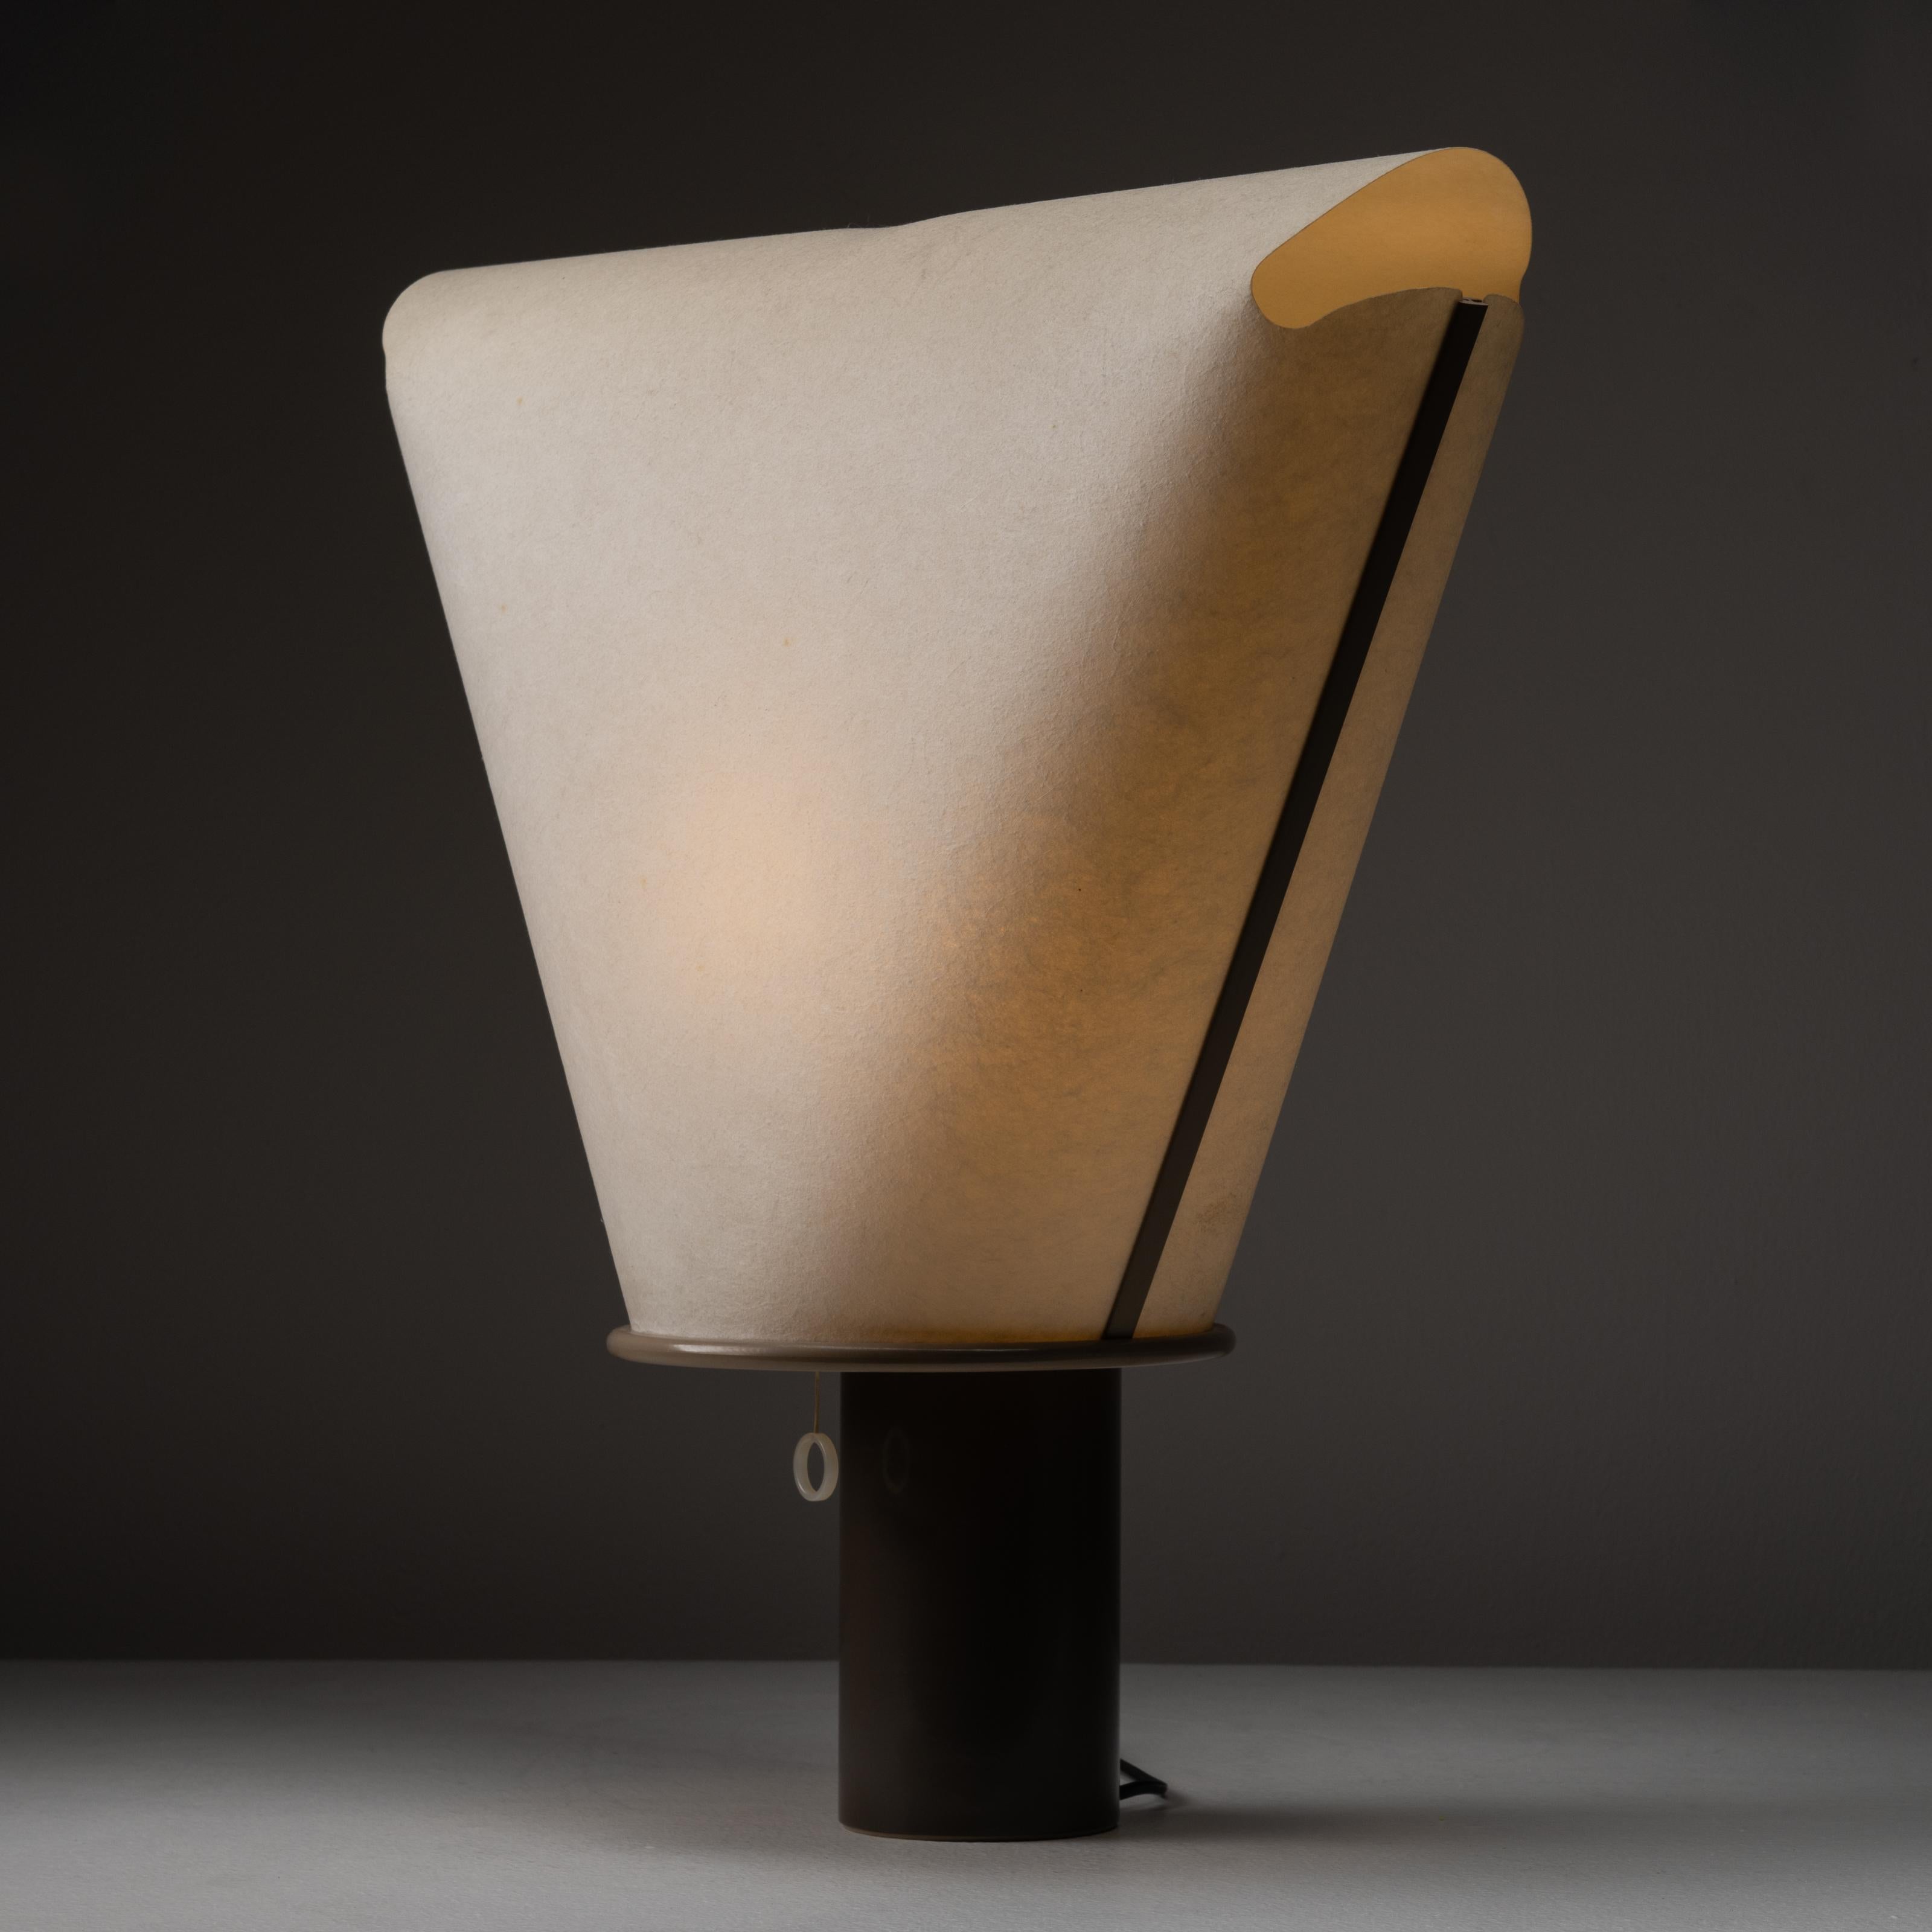 Dolly A 200 Desk Lamp by King & Miranda for Arteluce. Designed and manufactured in Italy, circa 1970s. Unique table lamp with lantern like waxed paper shade in the shape of a soft triangle, with a solid plastic cylindrical base. Plastic ring pull